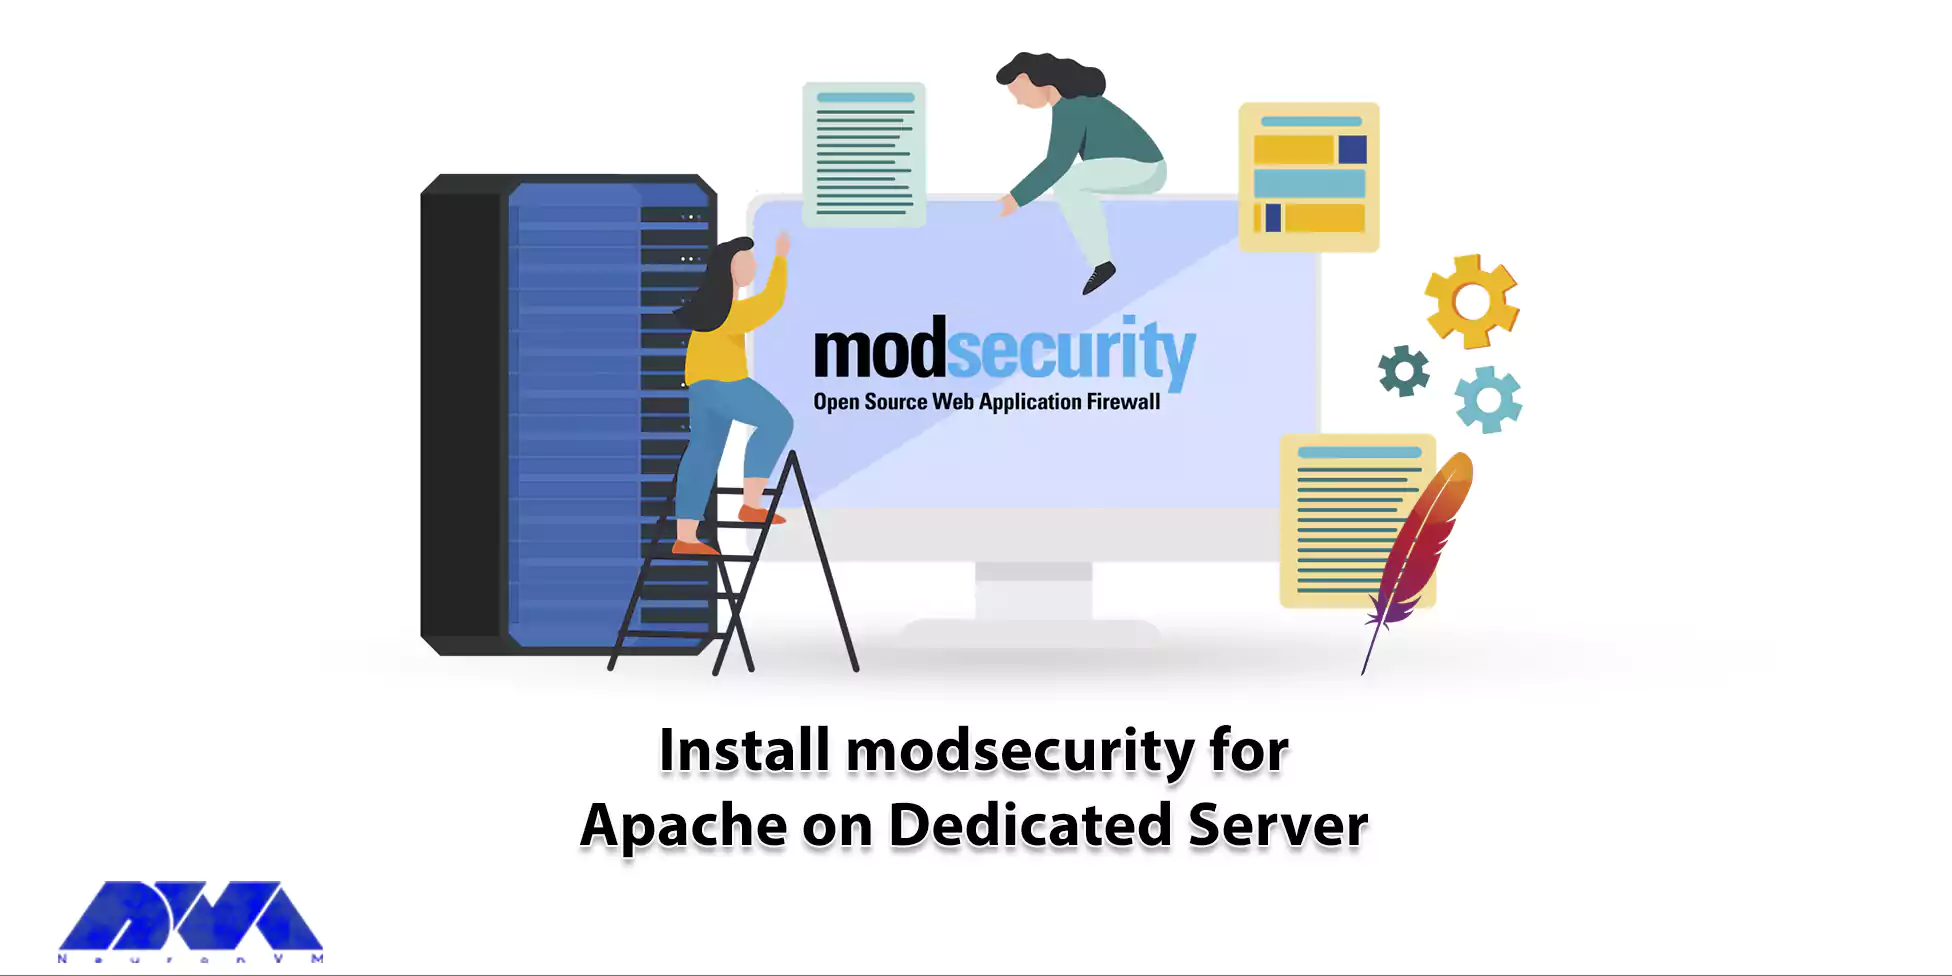 How to Install modsecurity for Apache on Dedicated Server